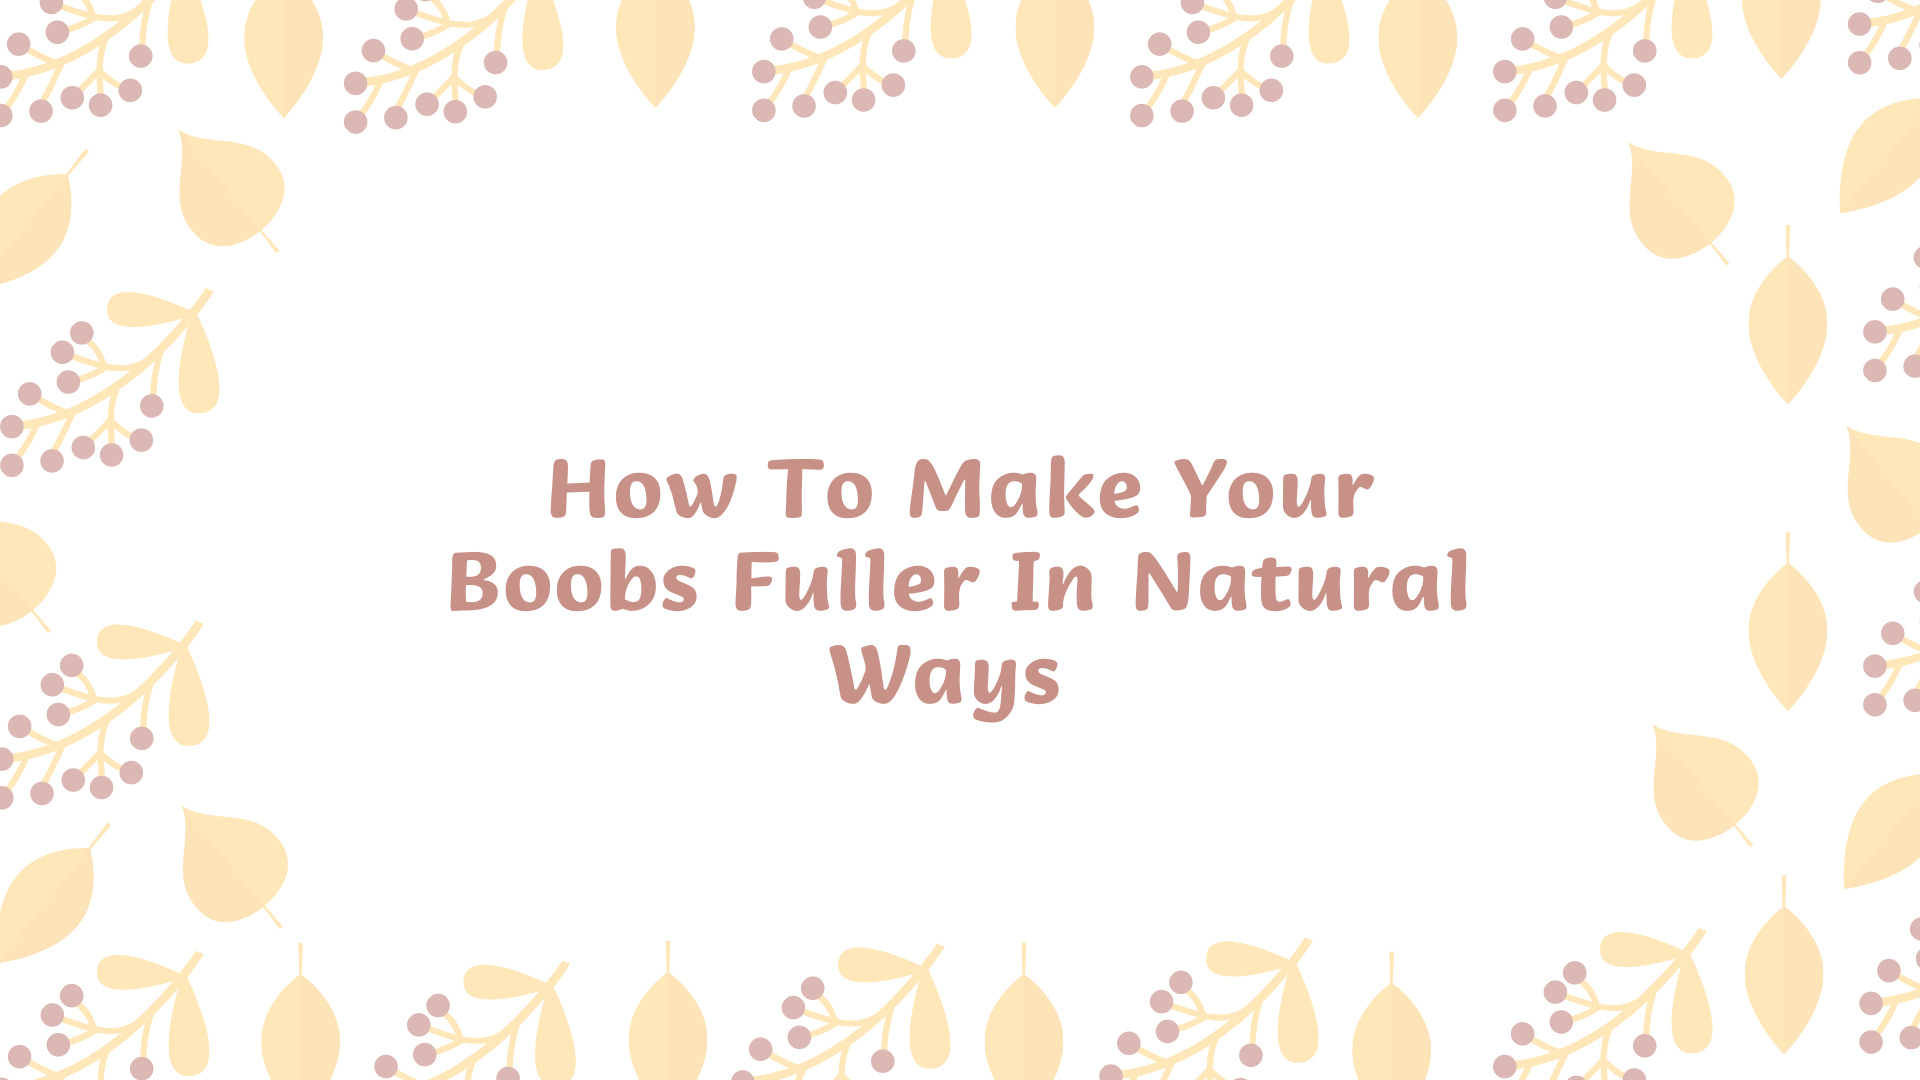 Natural Ways To Make Your Boobs Fuller